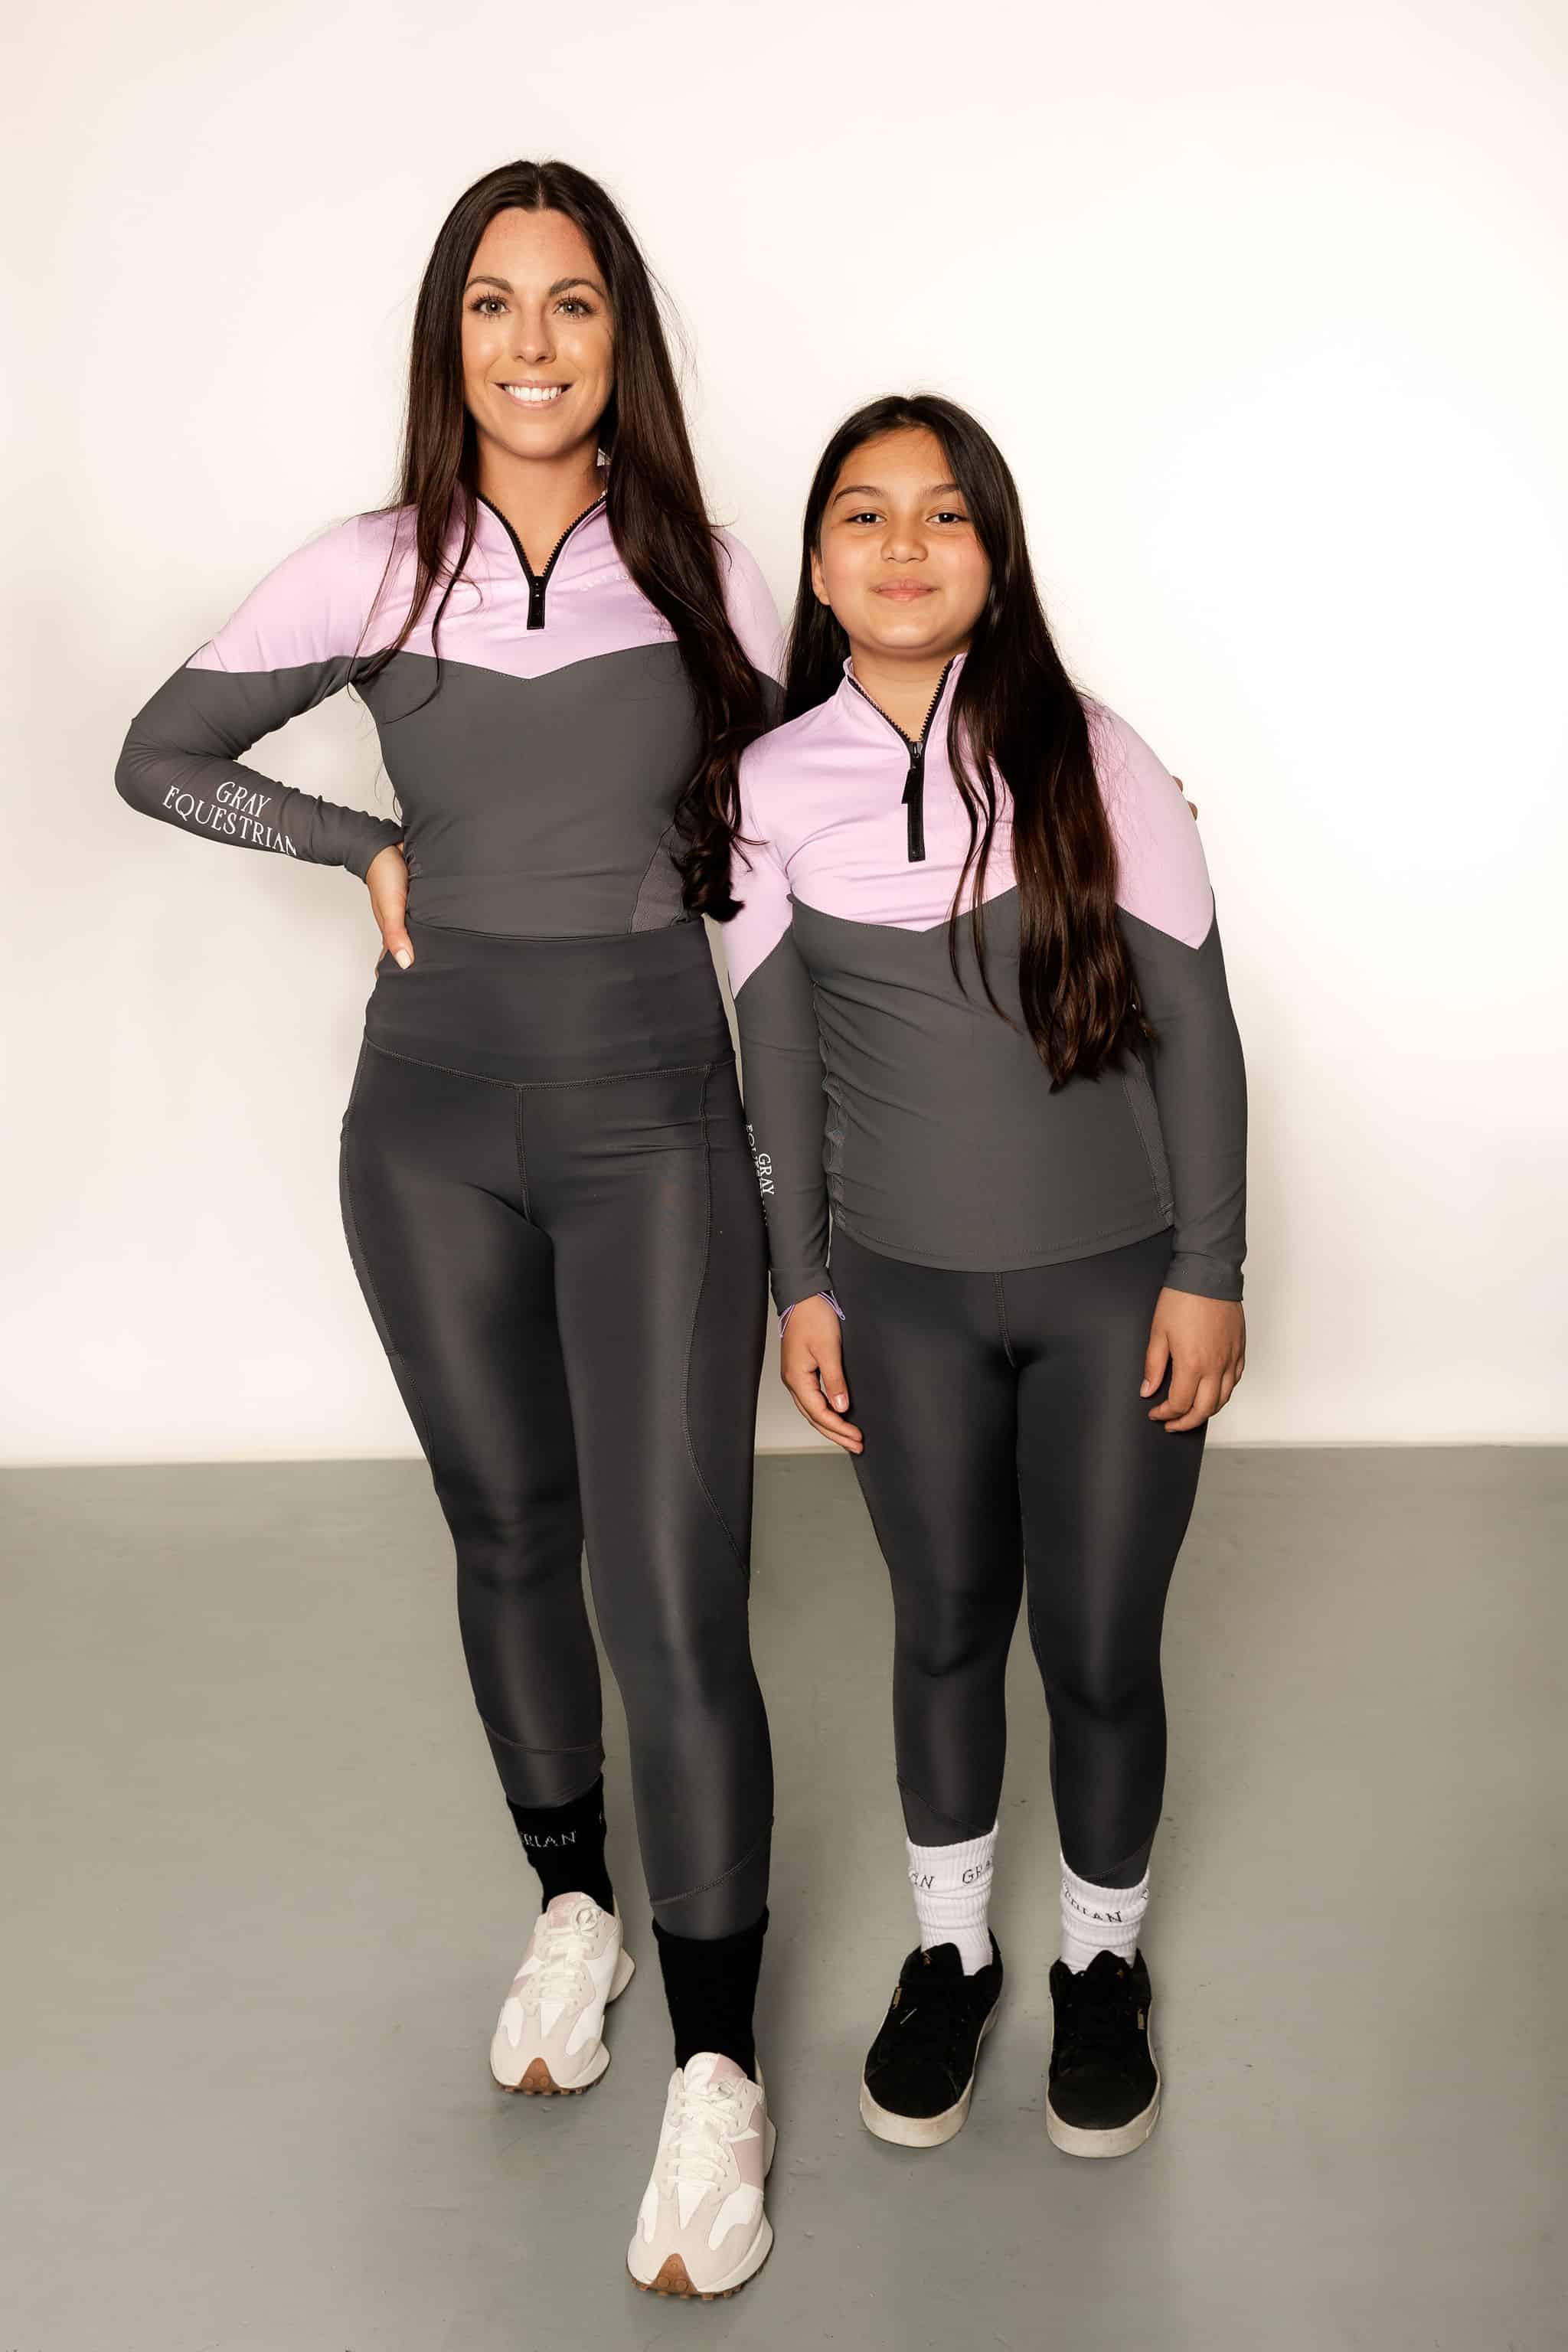 Young rider wearing lilac and grey base layer with adult rider matching